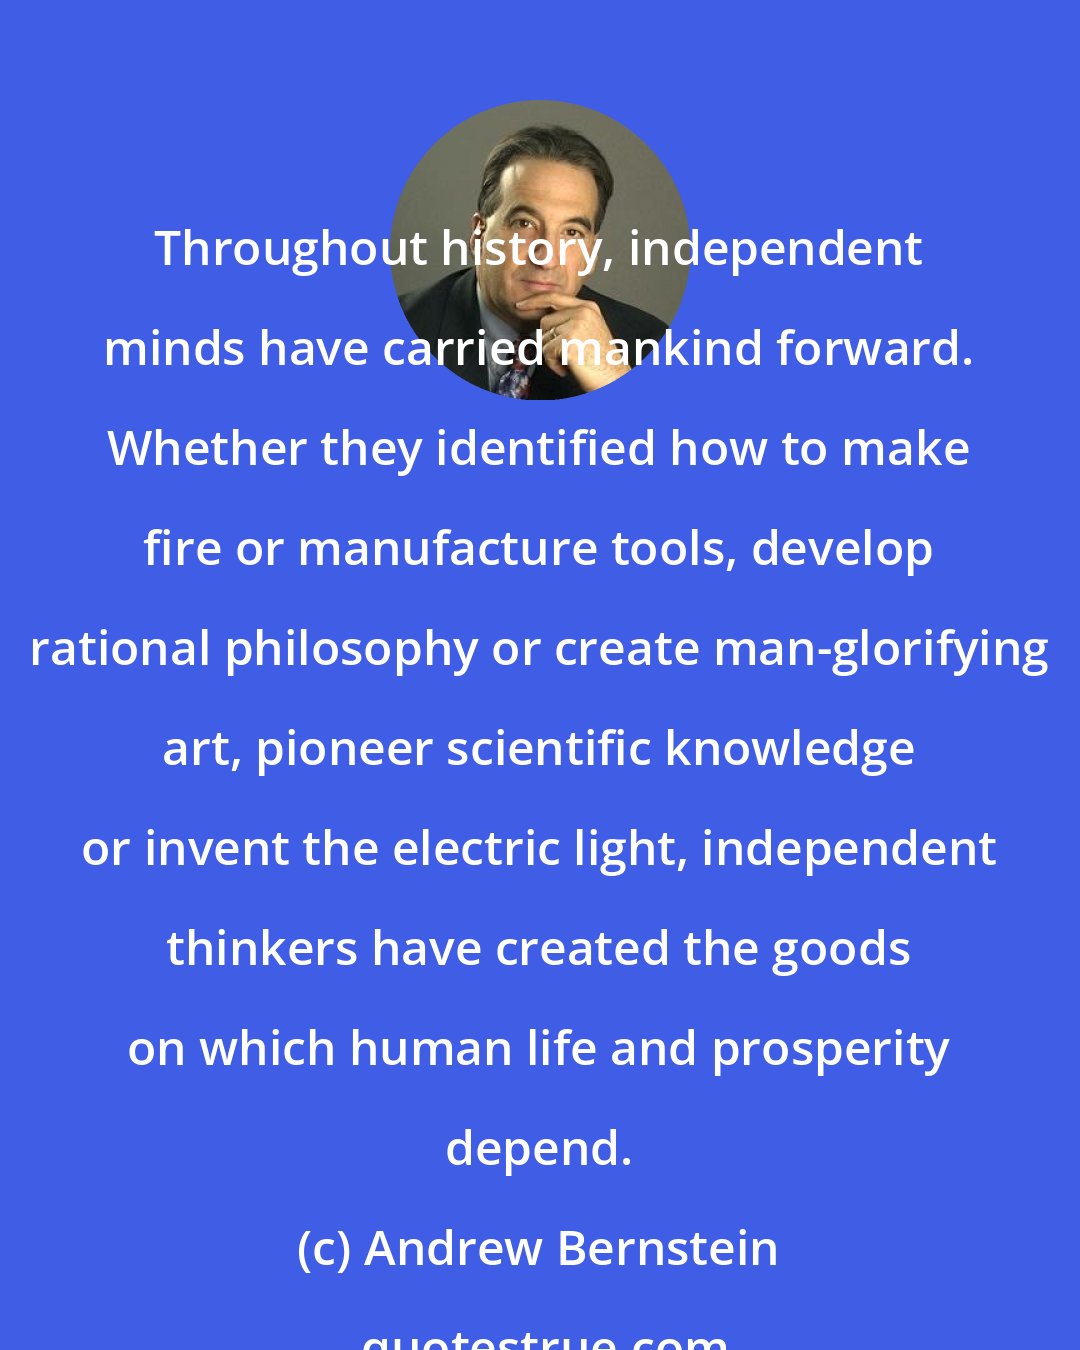 Andrew Bernstein: Throughout history, independent minds have carried mankind forward. Whether they identified how to make fire or manufacture tools, develop rational philosophy or create man-glorifying art, pioneer scientific knowledge or invent the electric light, independent thinkers have created the goods on which human life and prosperity depend.